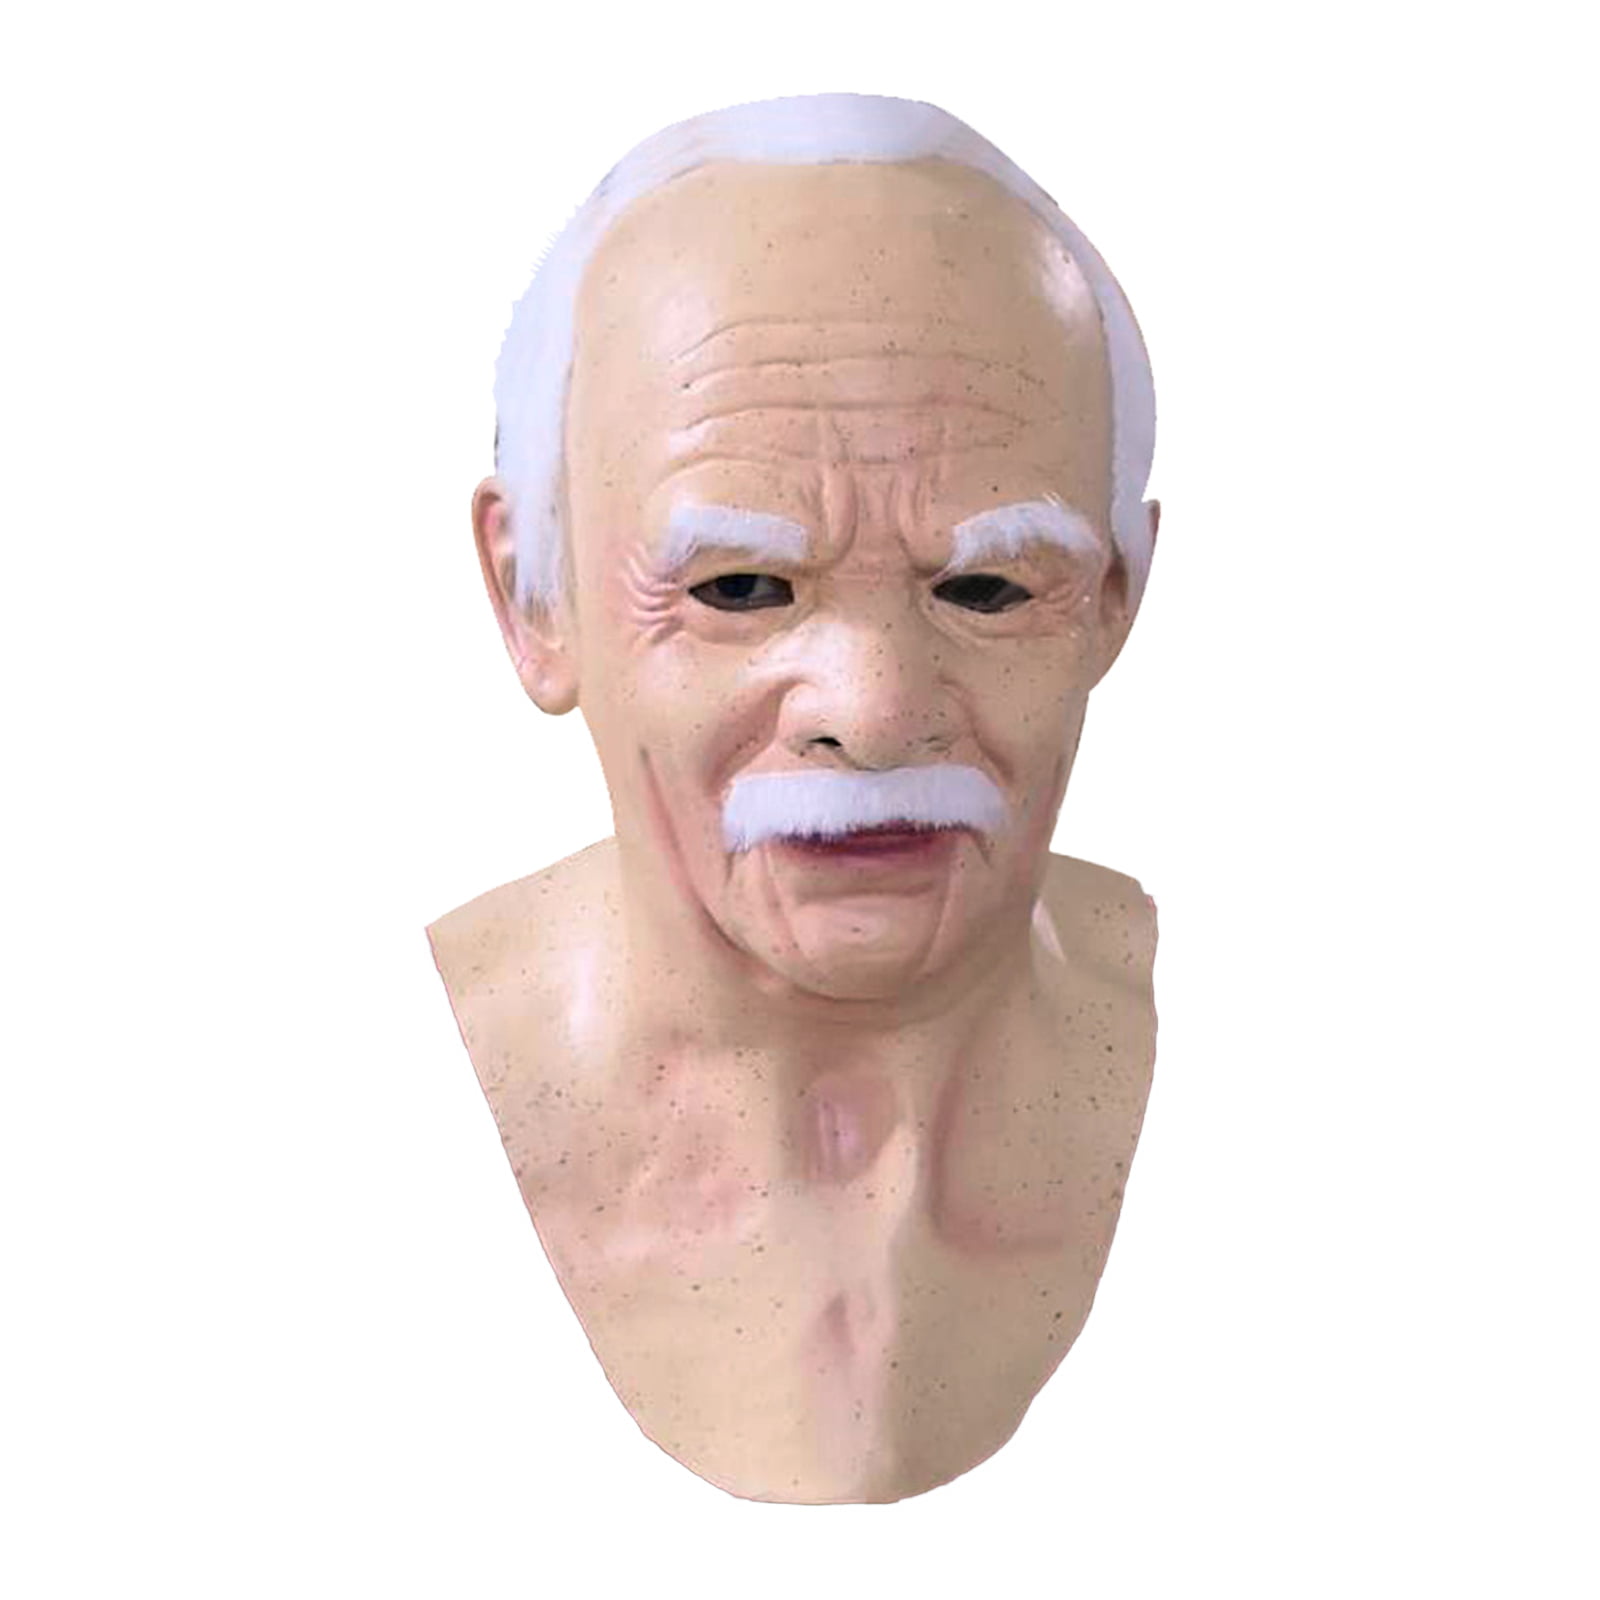 Halloween Cosplay Bald Old Man Latex Full Face Masks Scary Facepiece Party Artificial Head Cover